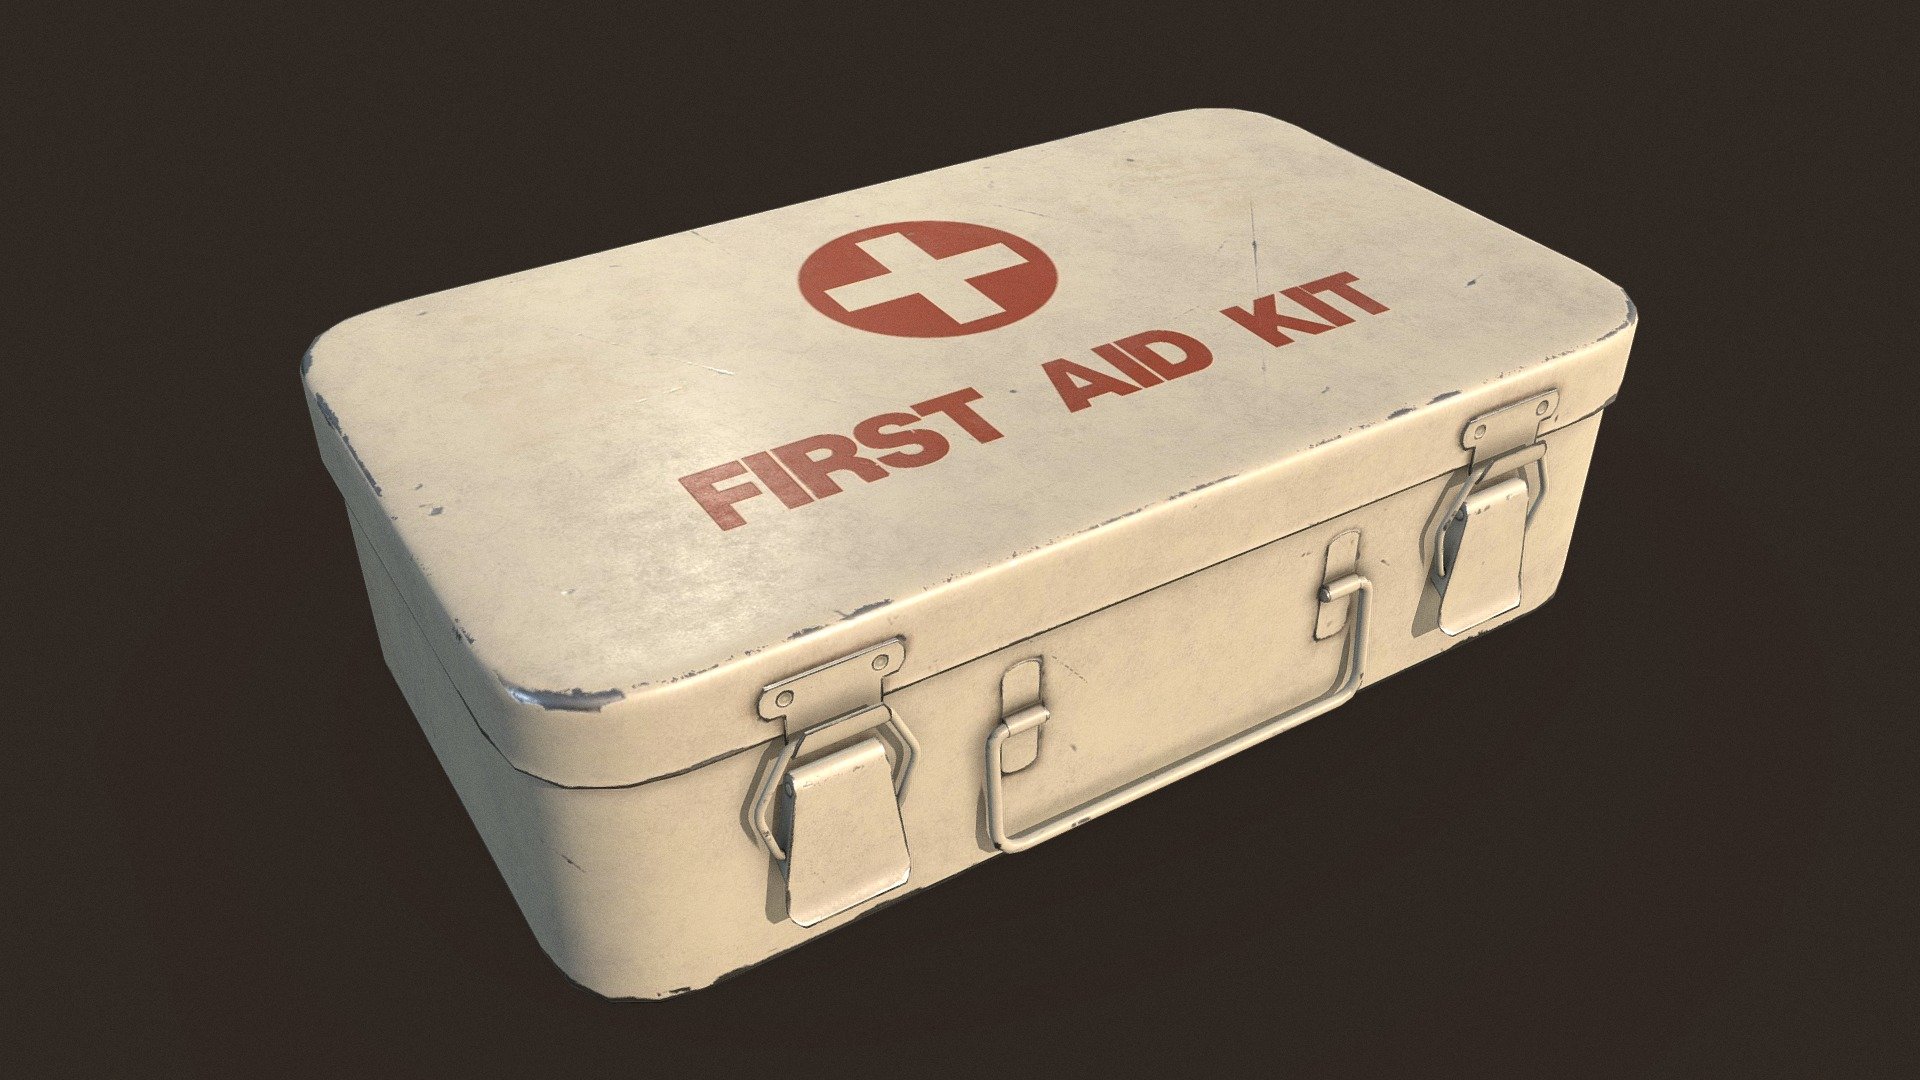 Vintage First Aid Kit it's a lowpoly game ready model with unwrapped UVs and PBR textures. 

UVs: channel 1: overlapping; channel 2: non-overlapping (for baking lightmaps).

Formats: FBX, Obj. Marmoset Toolbag scene 3.08 (.tbscene) Textures format: TGA. Textures resolution: 2048x2048px.

Textures set includes:




Metal_Roughness: BaseColor, Roughness, Metallic, Normal, Height, AO.

Unity 5 (Standart Metallic): AlbedoTransparency, AO, Normal, MetallicSmoothness

Unreal Engine 4: BaseColor, OcclusionRoughnessMetallic, Normal.



Artstation: https://www.artstation.com/tatianagladkaya

Instagram: https://www.instagram.com/t.gladkaya_ - Vintage First Aid Kit - 3D model by Tatiana Gladkaya (@tatiana_gladkaya) 3d model